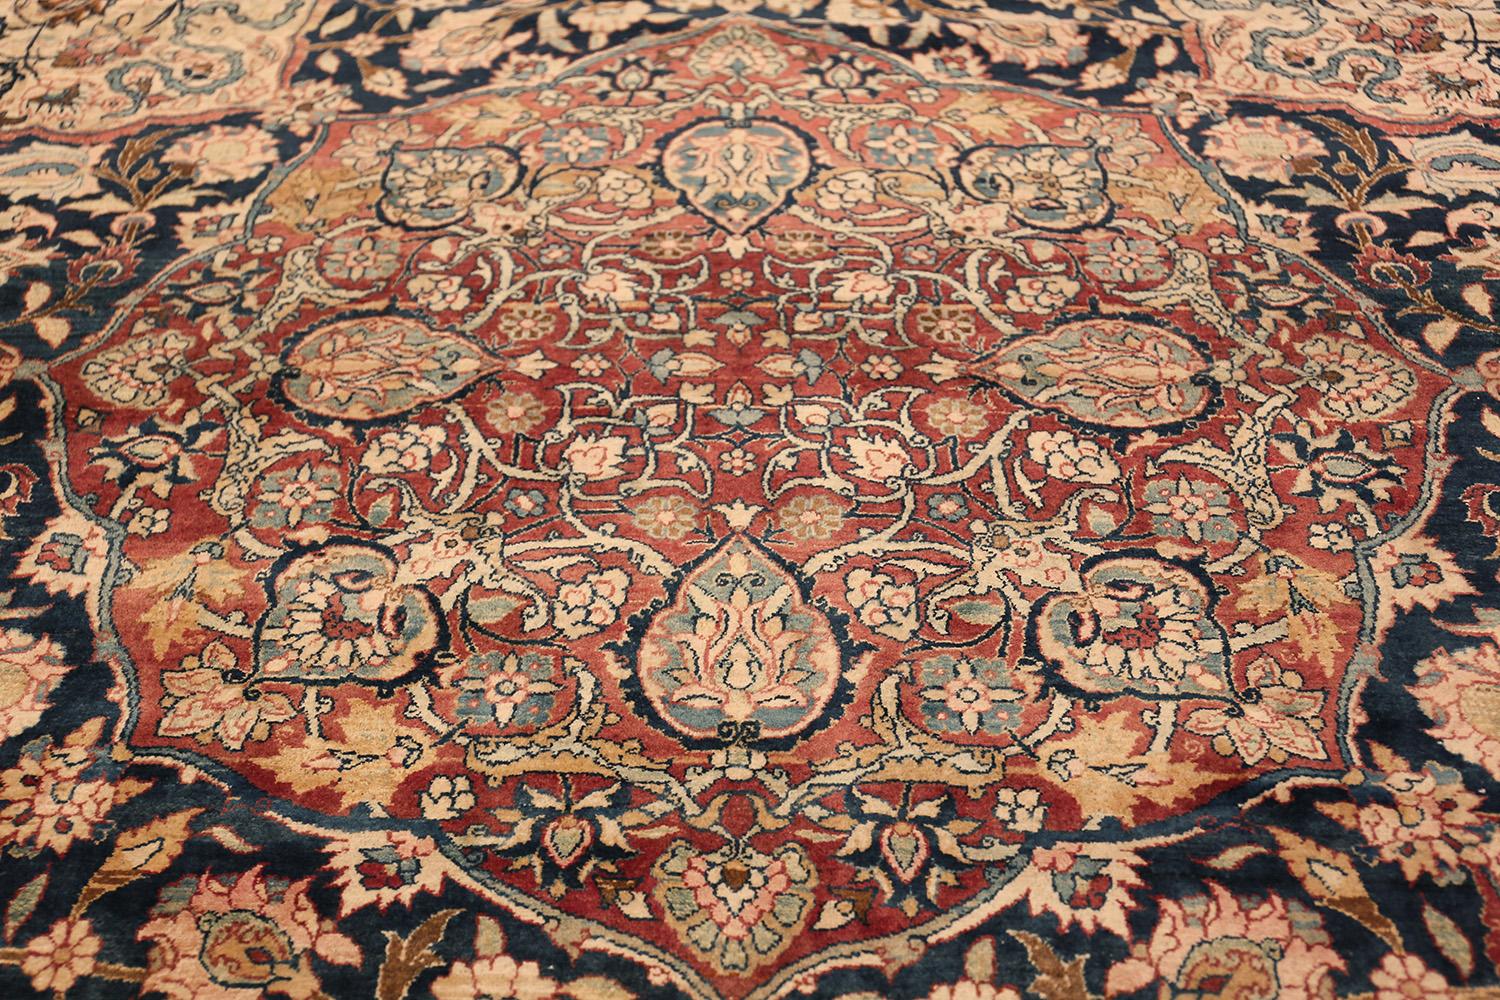 Oversized Antique Tehran Persian Carpet. Size: 14 ft 3 in x 22 ft 3 in 4